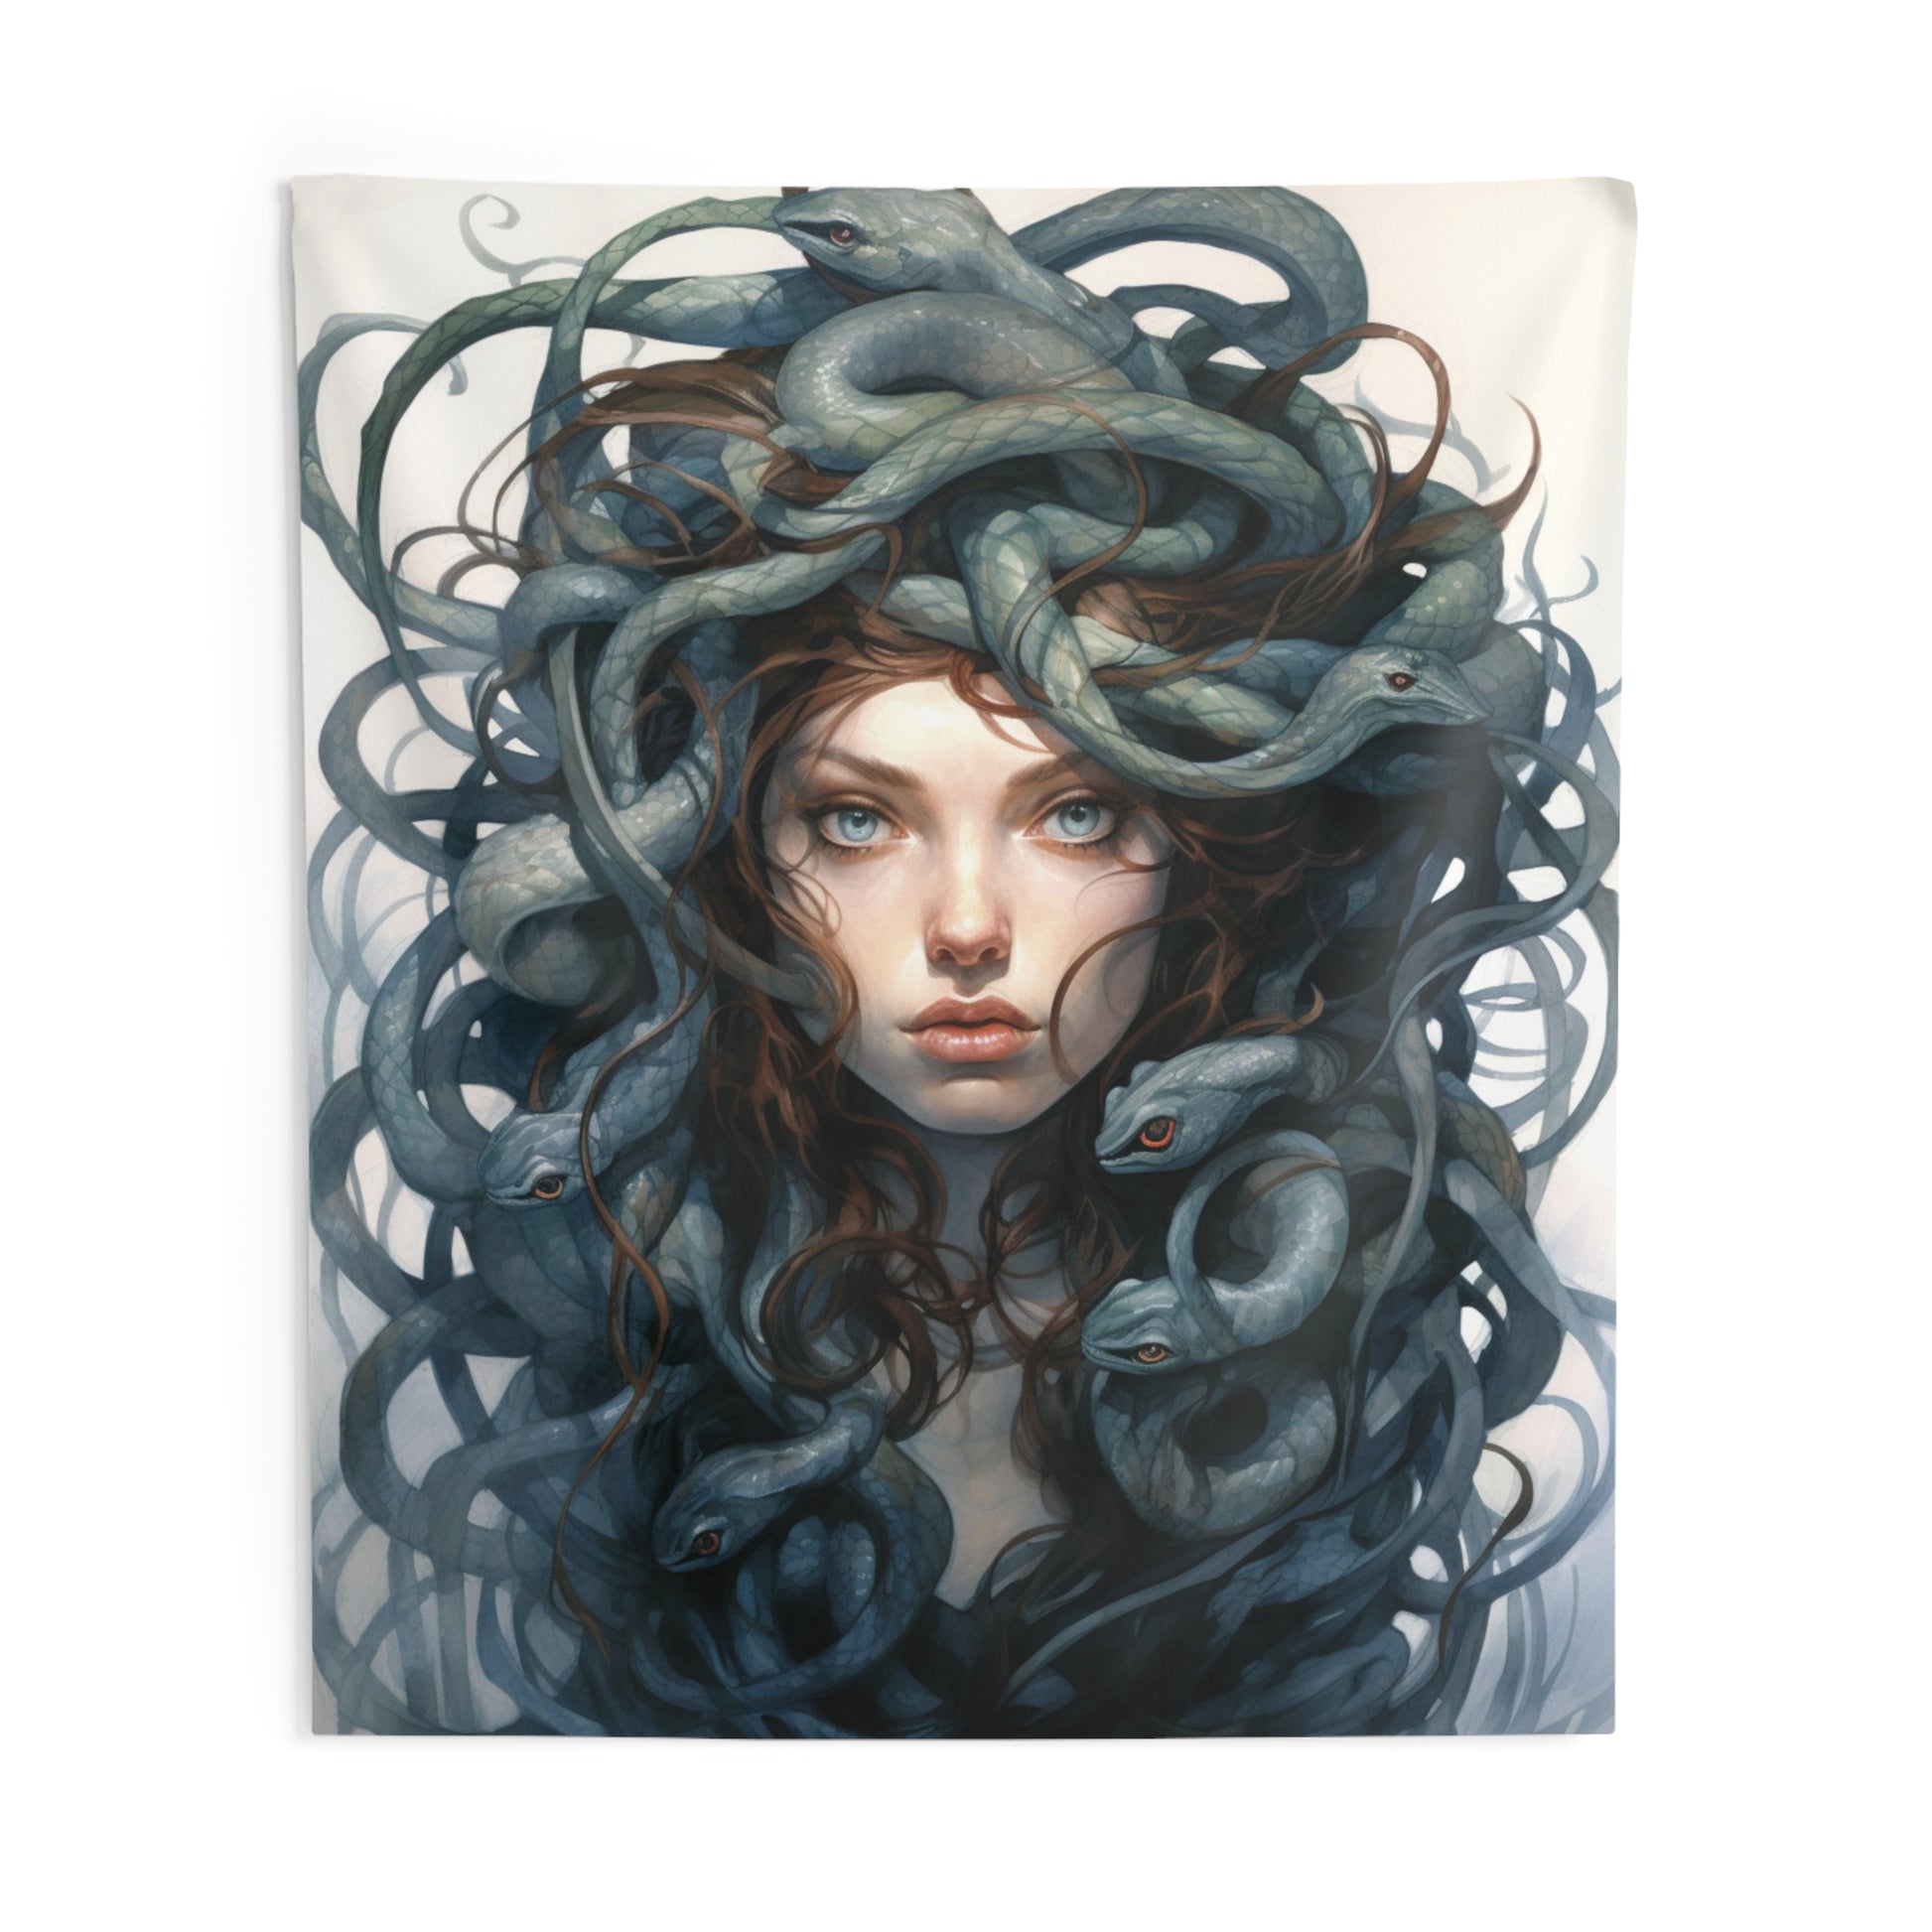 Medusa Tapestry, Women Mythology Snakes Hair Wall Art Hanging Cool Unique Vertical Aesthetic Large Small Decor Bedroom College Dorm Starcove Fashion